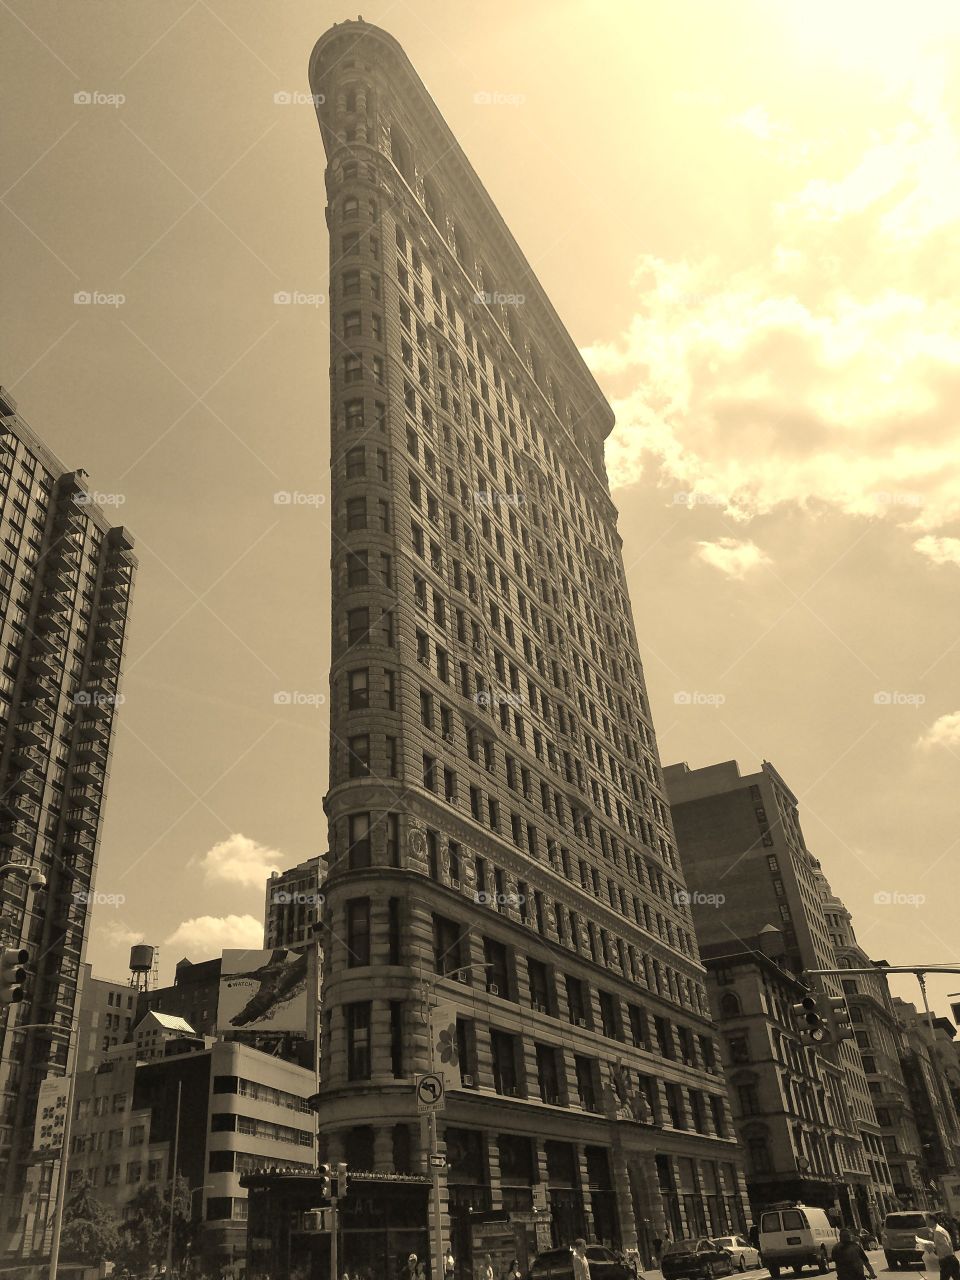 Flatiron Building on 23rd Street near Madison Square Park - Sepia Filter - May 19th 2017 in the afternoon